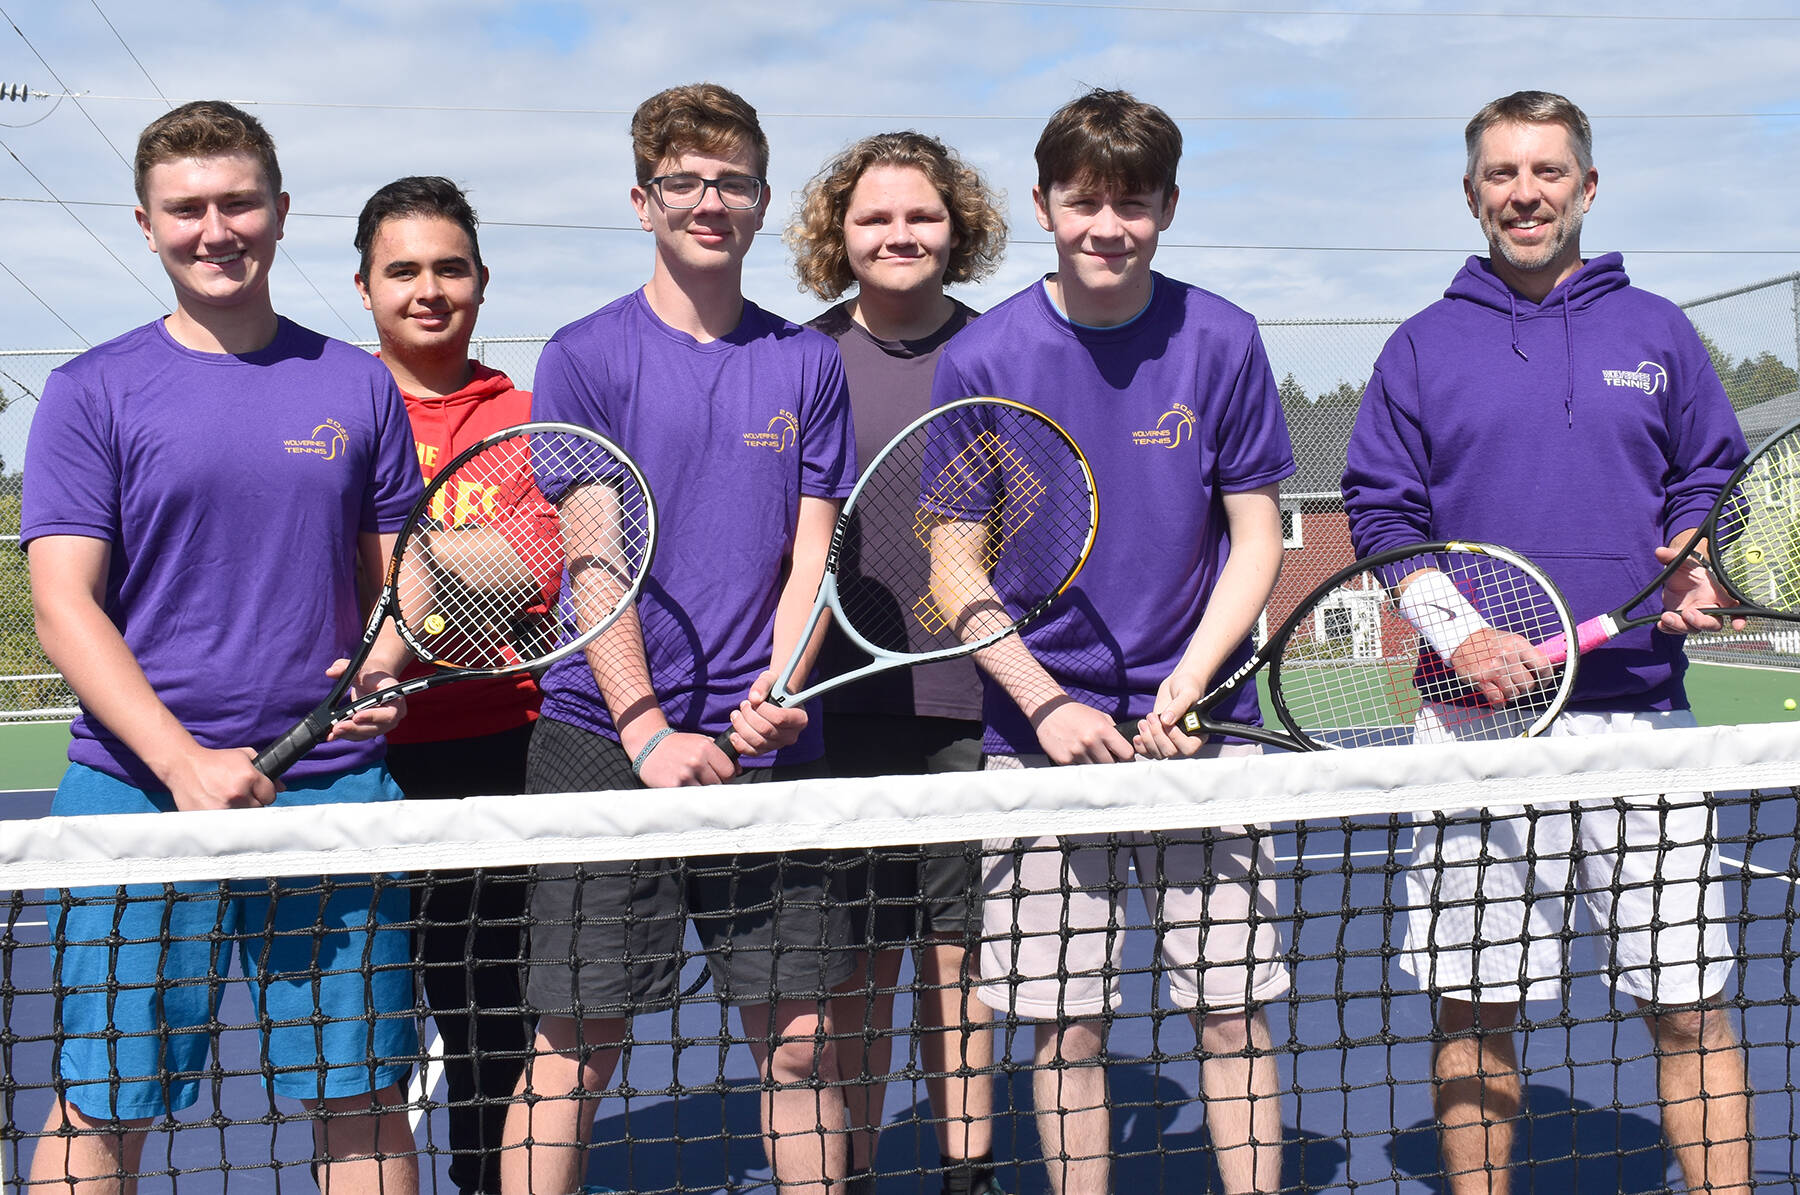 Kelley Balcomb-Bartok/Staff photo 
The 2023 FHHS Boys’ Tennis Team, left to right: Finn Graham, Aldo Valencia, Miles Posenjak, Phoenix Daily, Liam Copley, and Coach Kyle Loring. Not pictured are: Bowen VanHamersfeld, Nik Valsamaki, and Crede Janson.